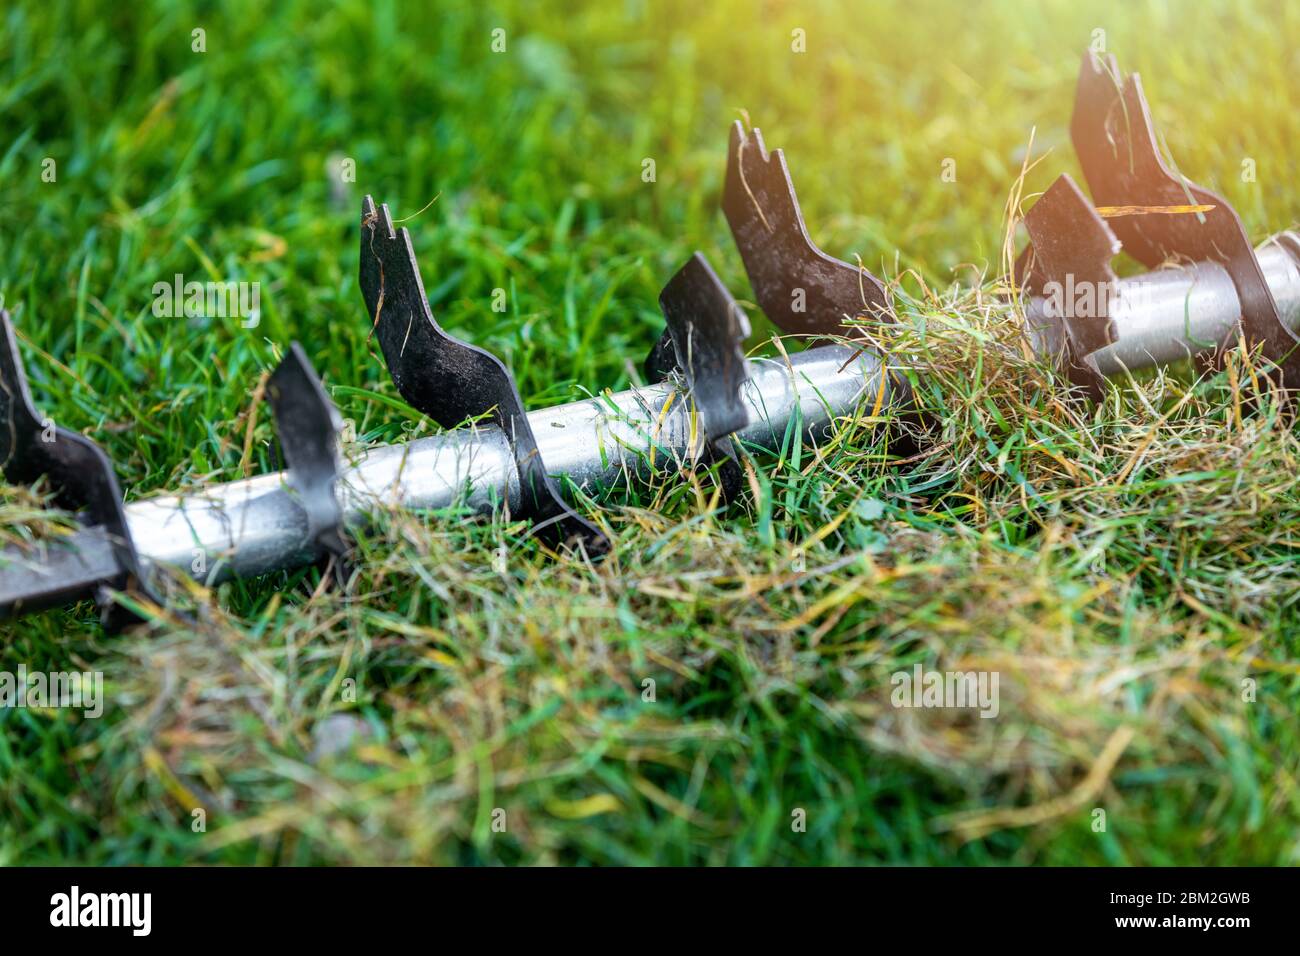 lawn care - old grass removal and soil aeration with scarifier Stock Photo